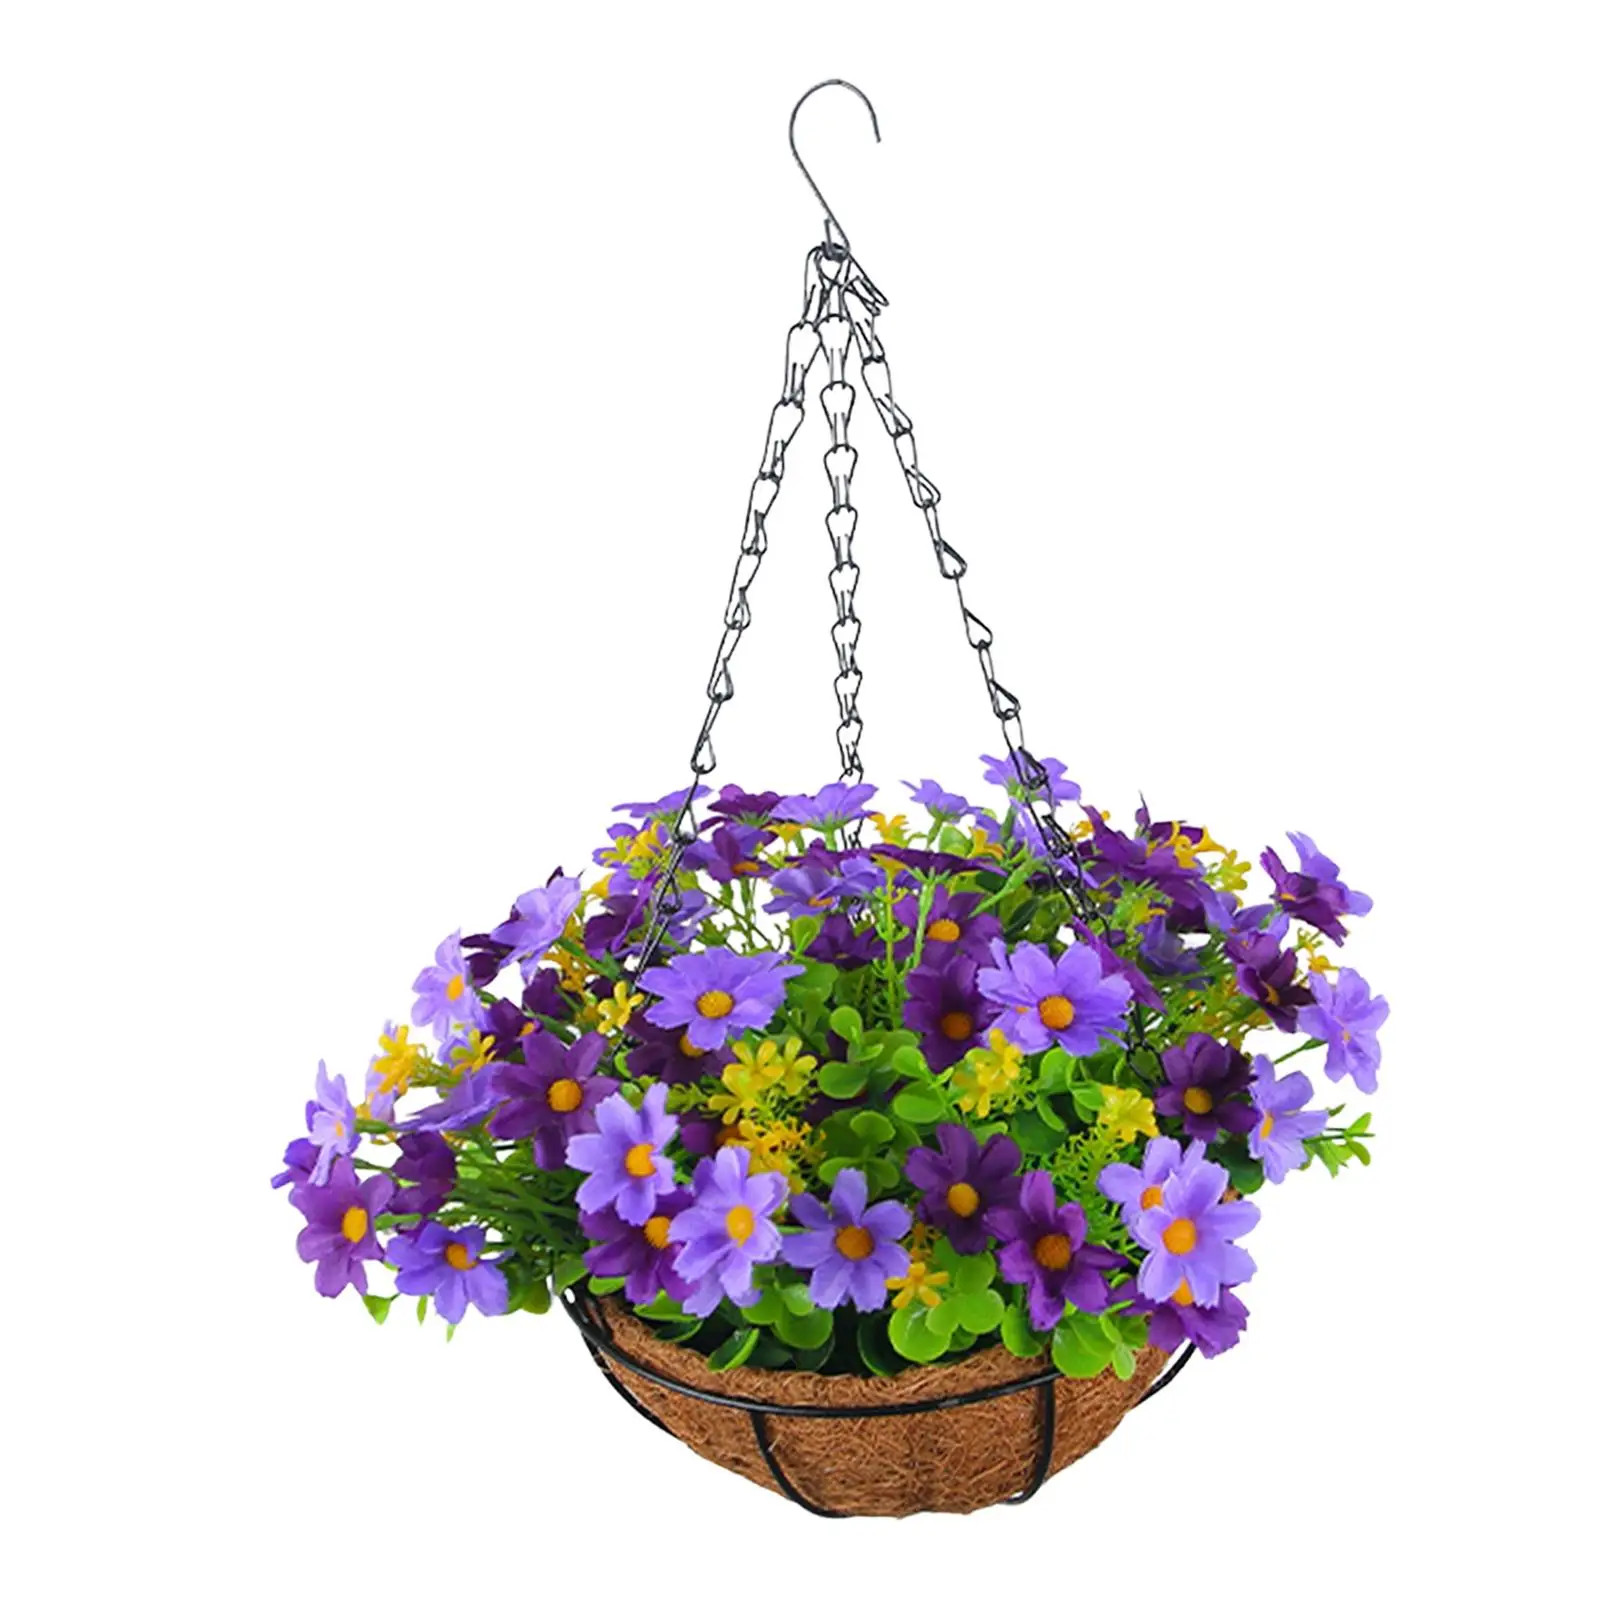 Artificial Daisy Flowers Basket Ornament Plant Hanger for Yard Balcony Patio